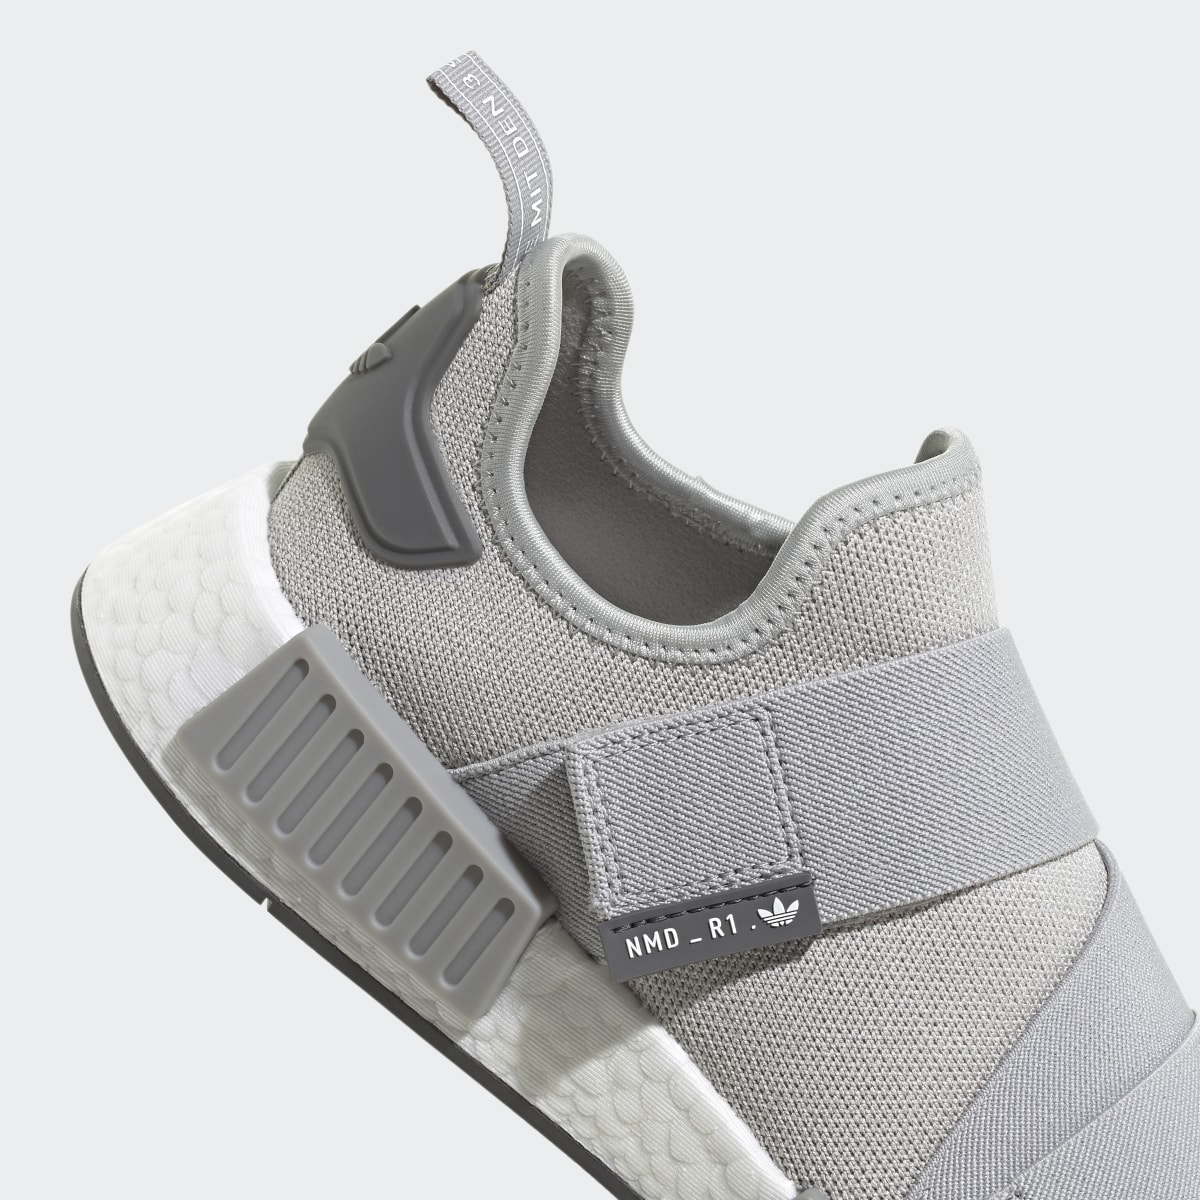 Adidas NMD_R1 Strap Shoes. 4